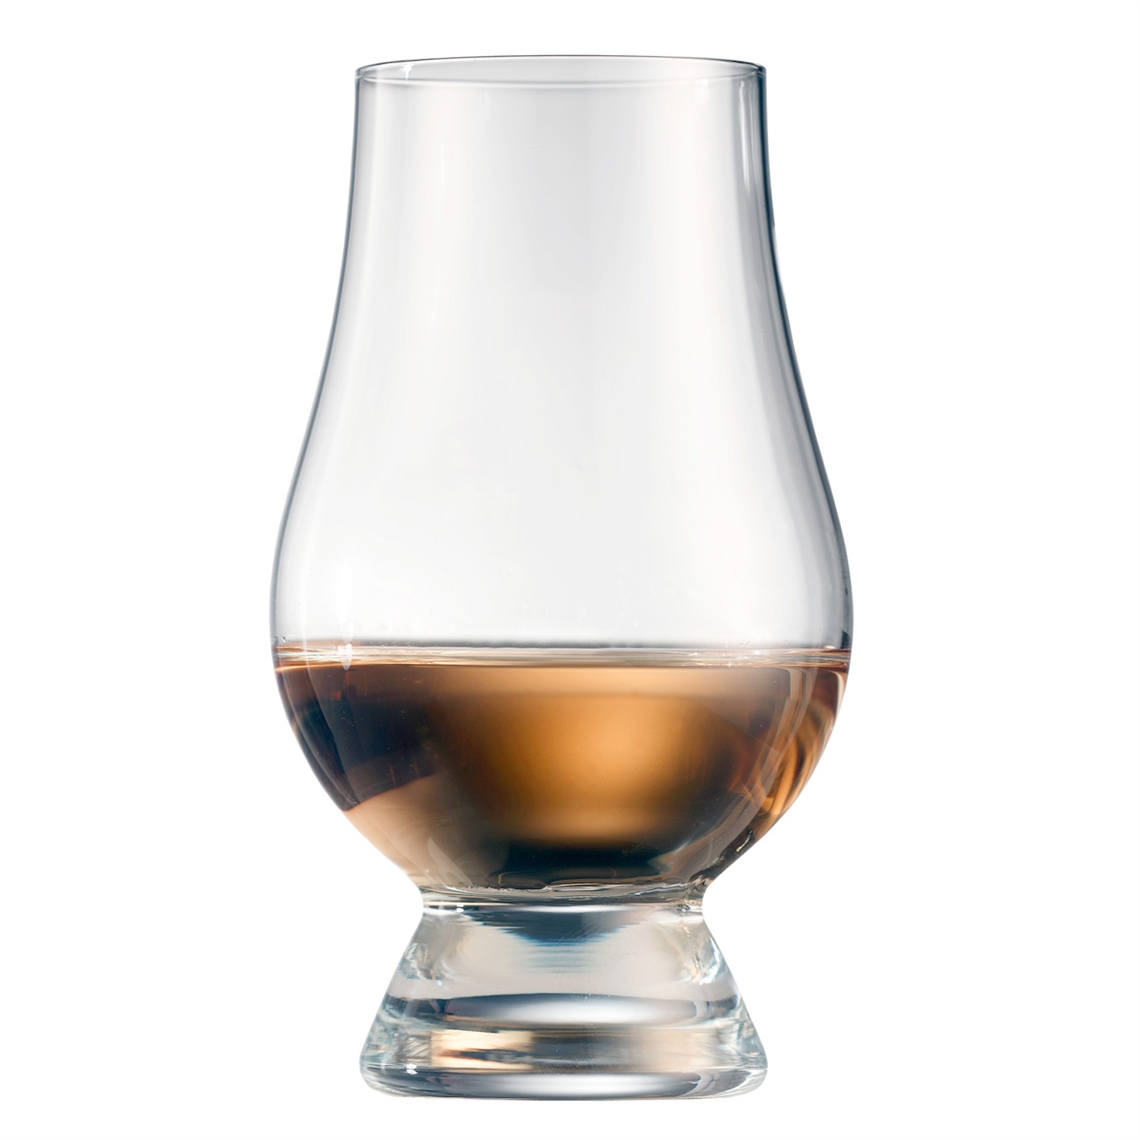 View more zalto from our Whisky Glasses range